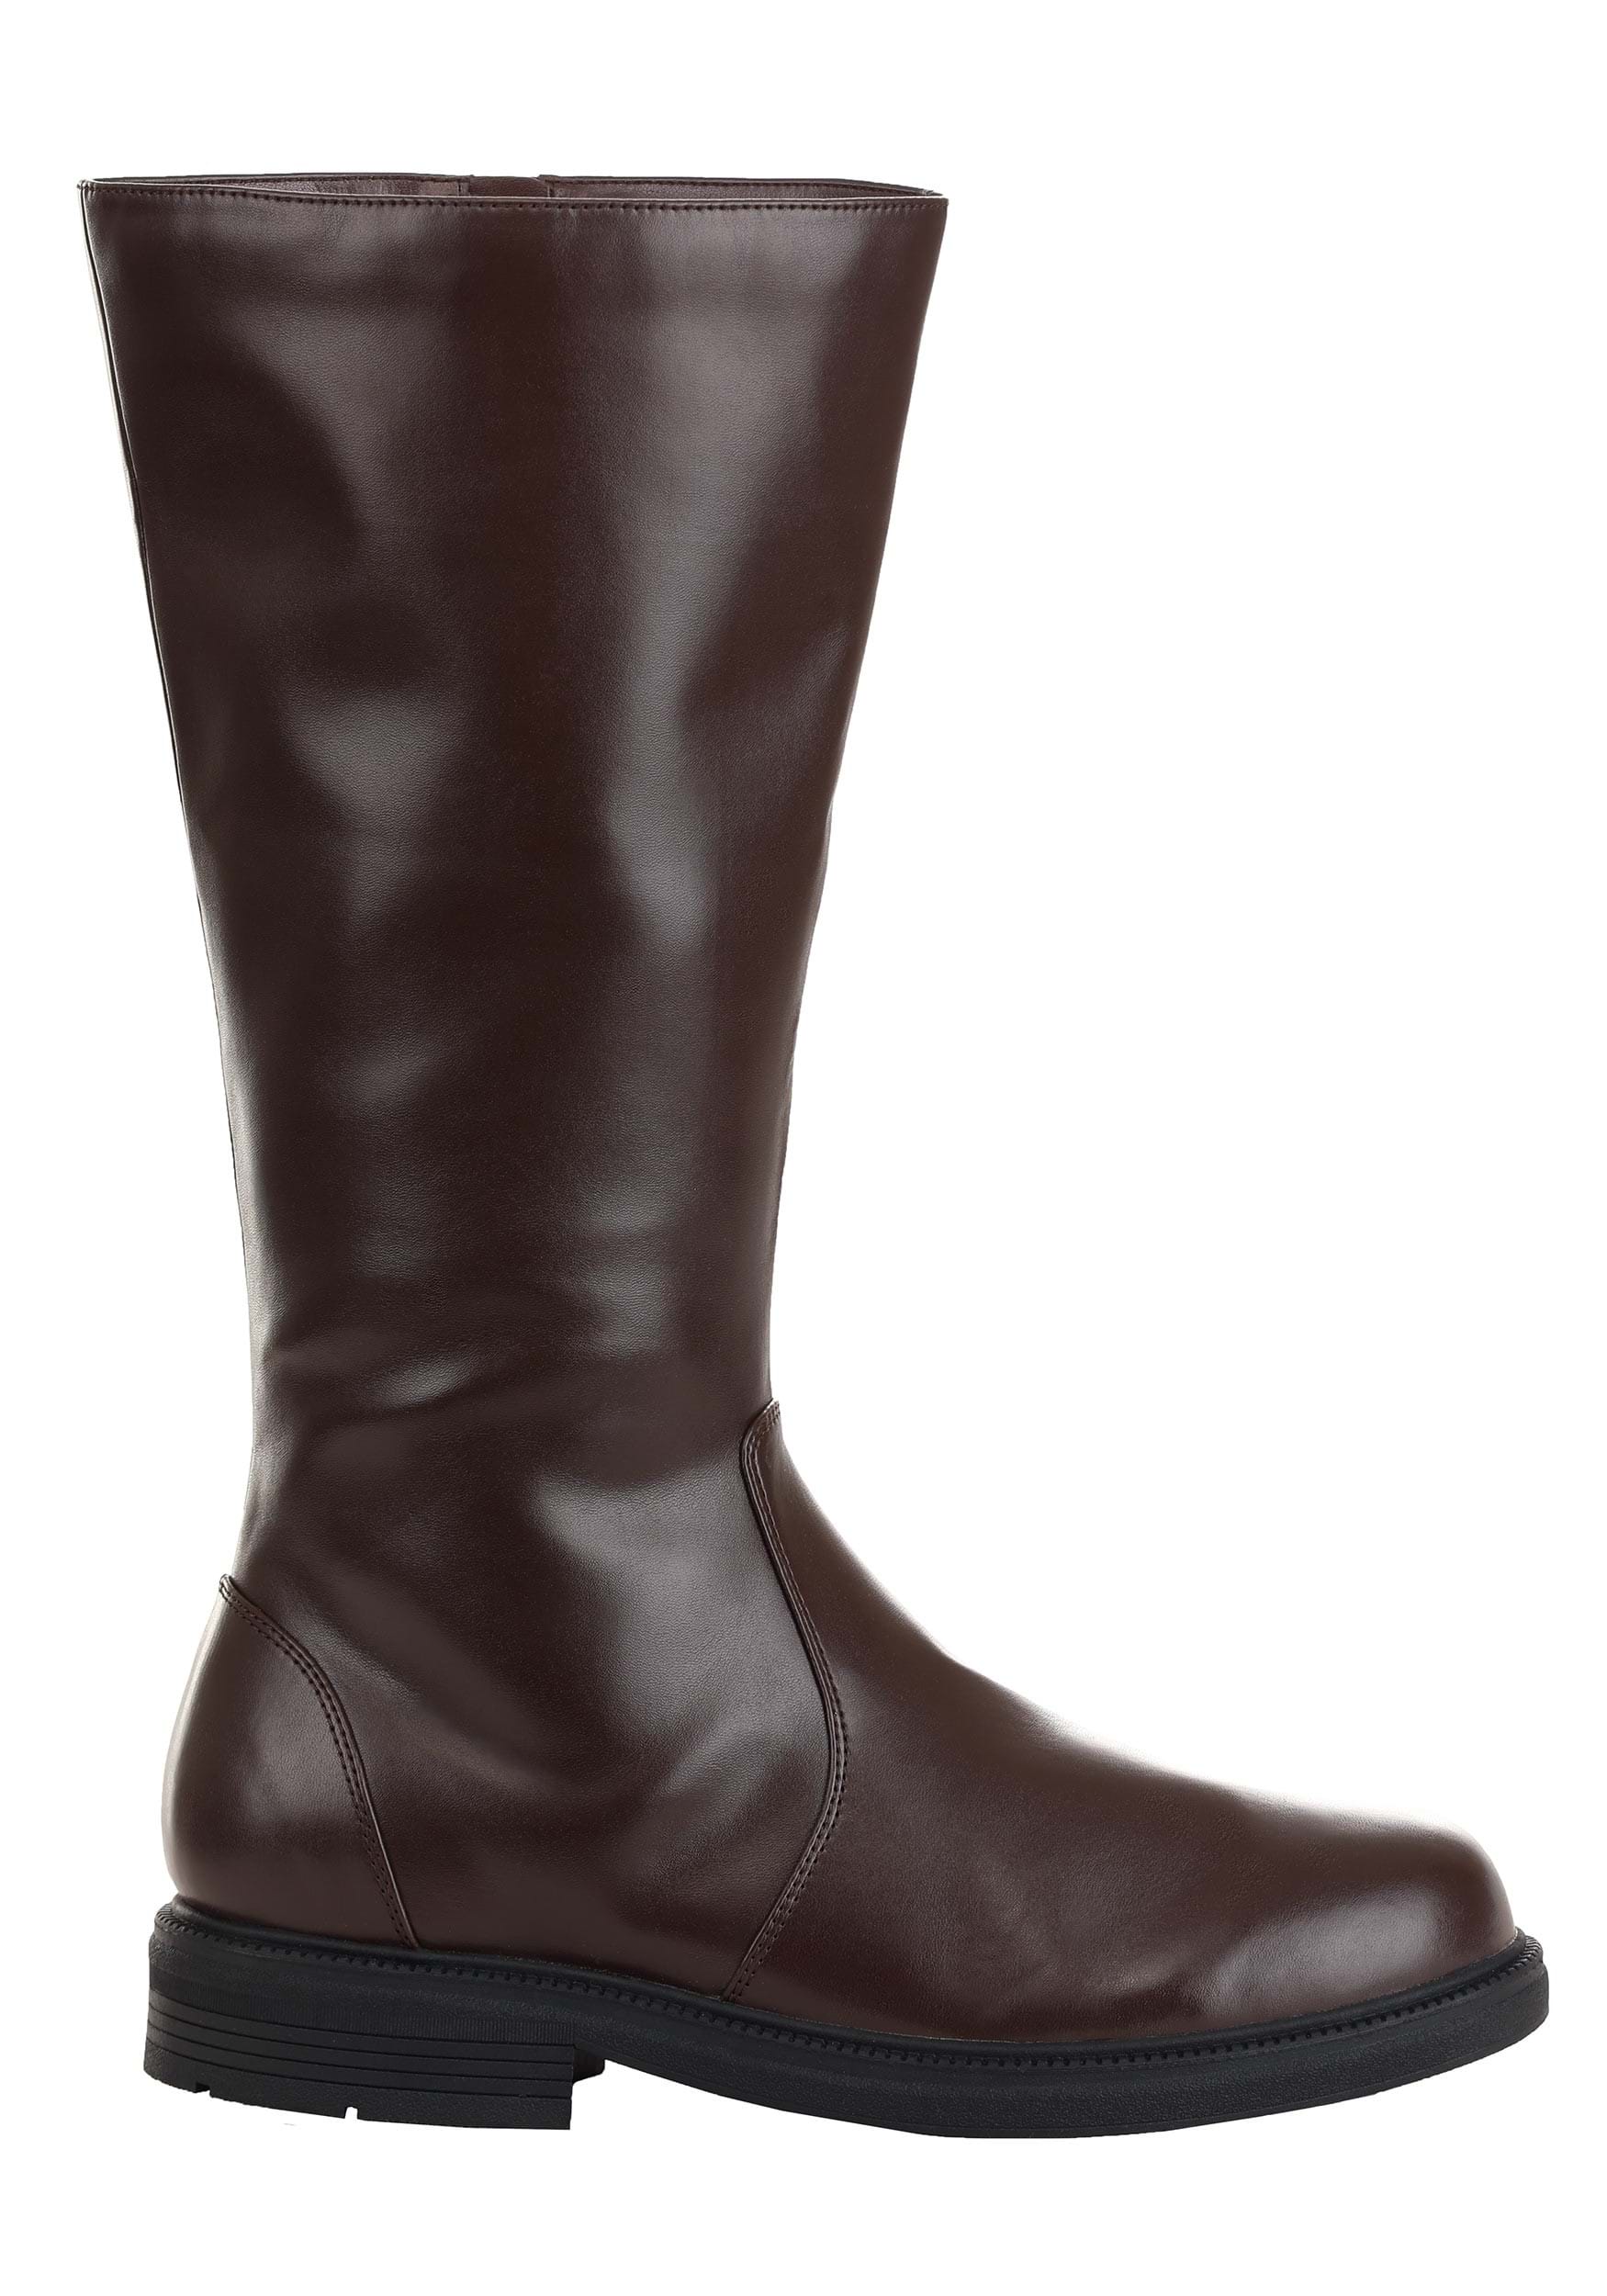 Adult Tall Brown Boots